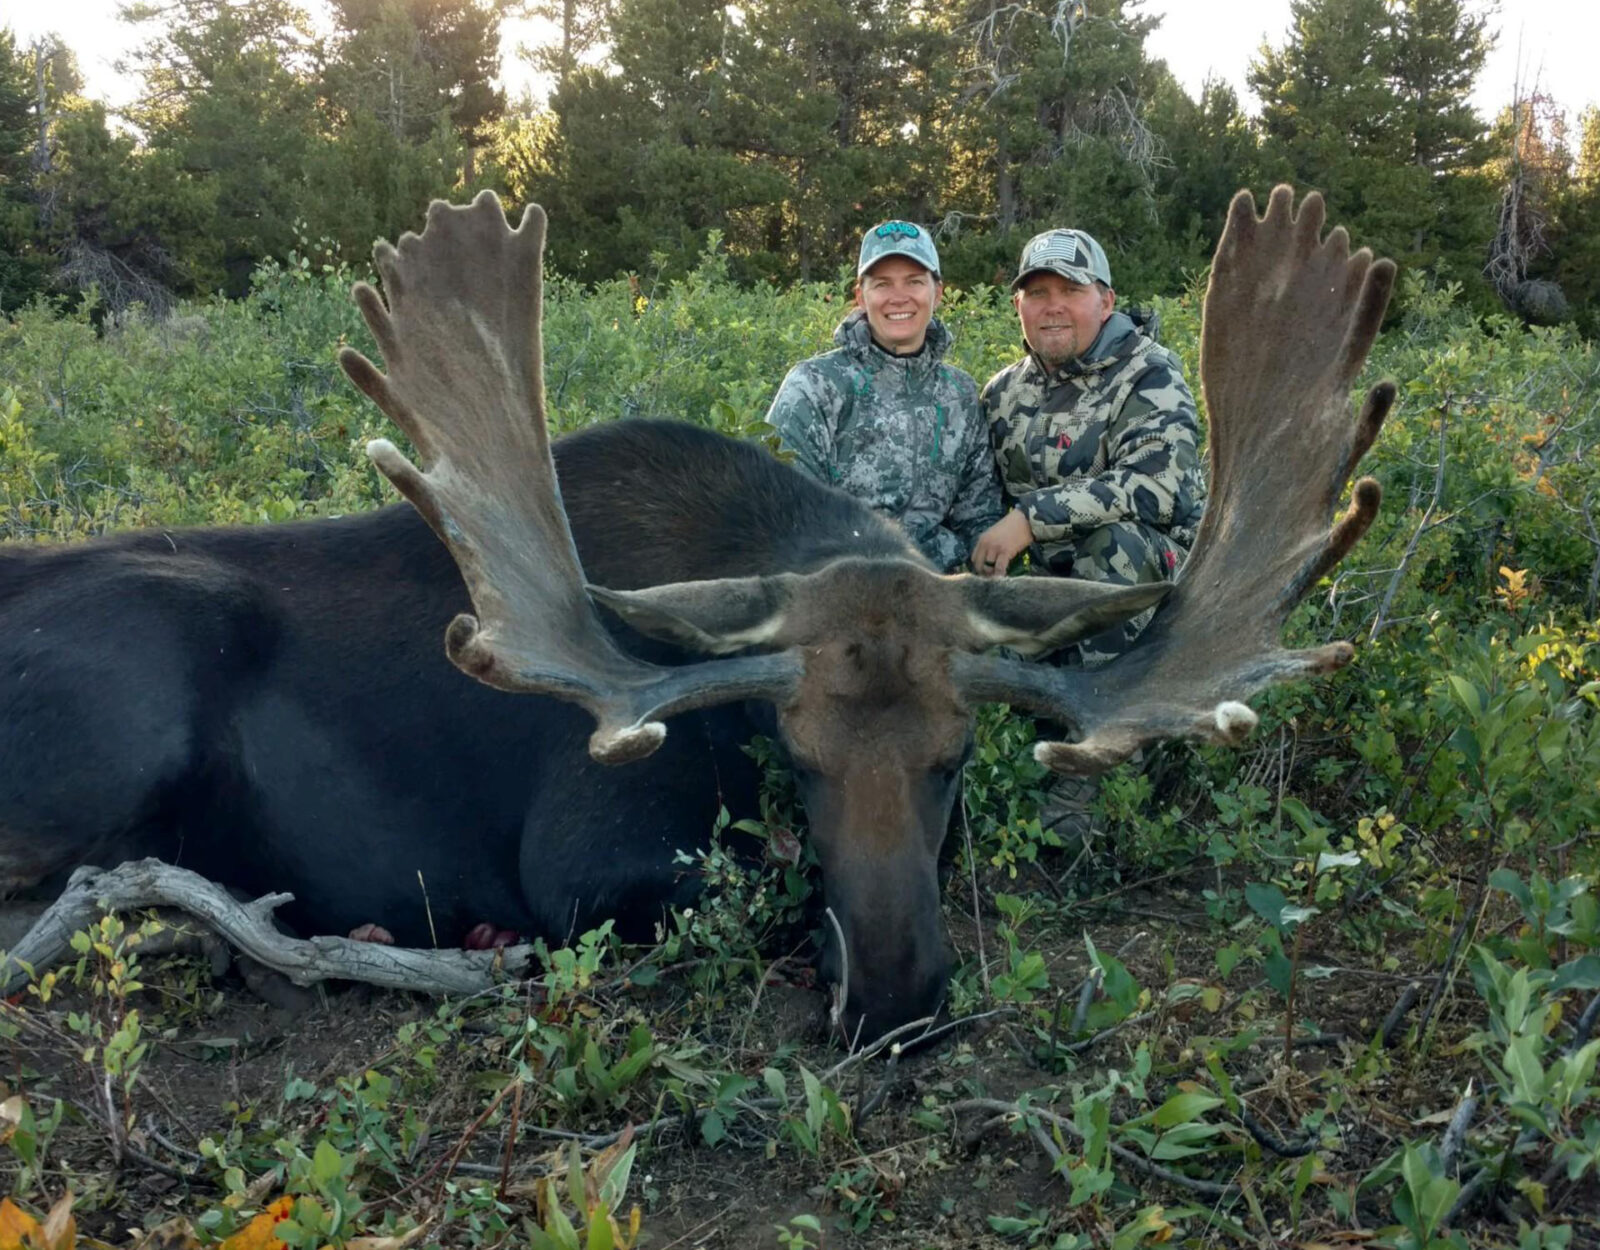 Two hunters pose with the bull moose one of them harvested.